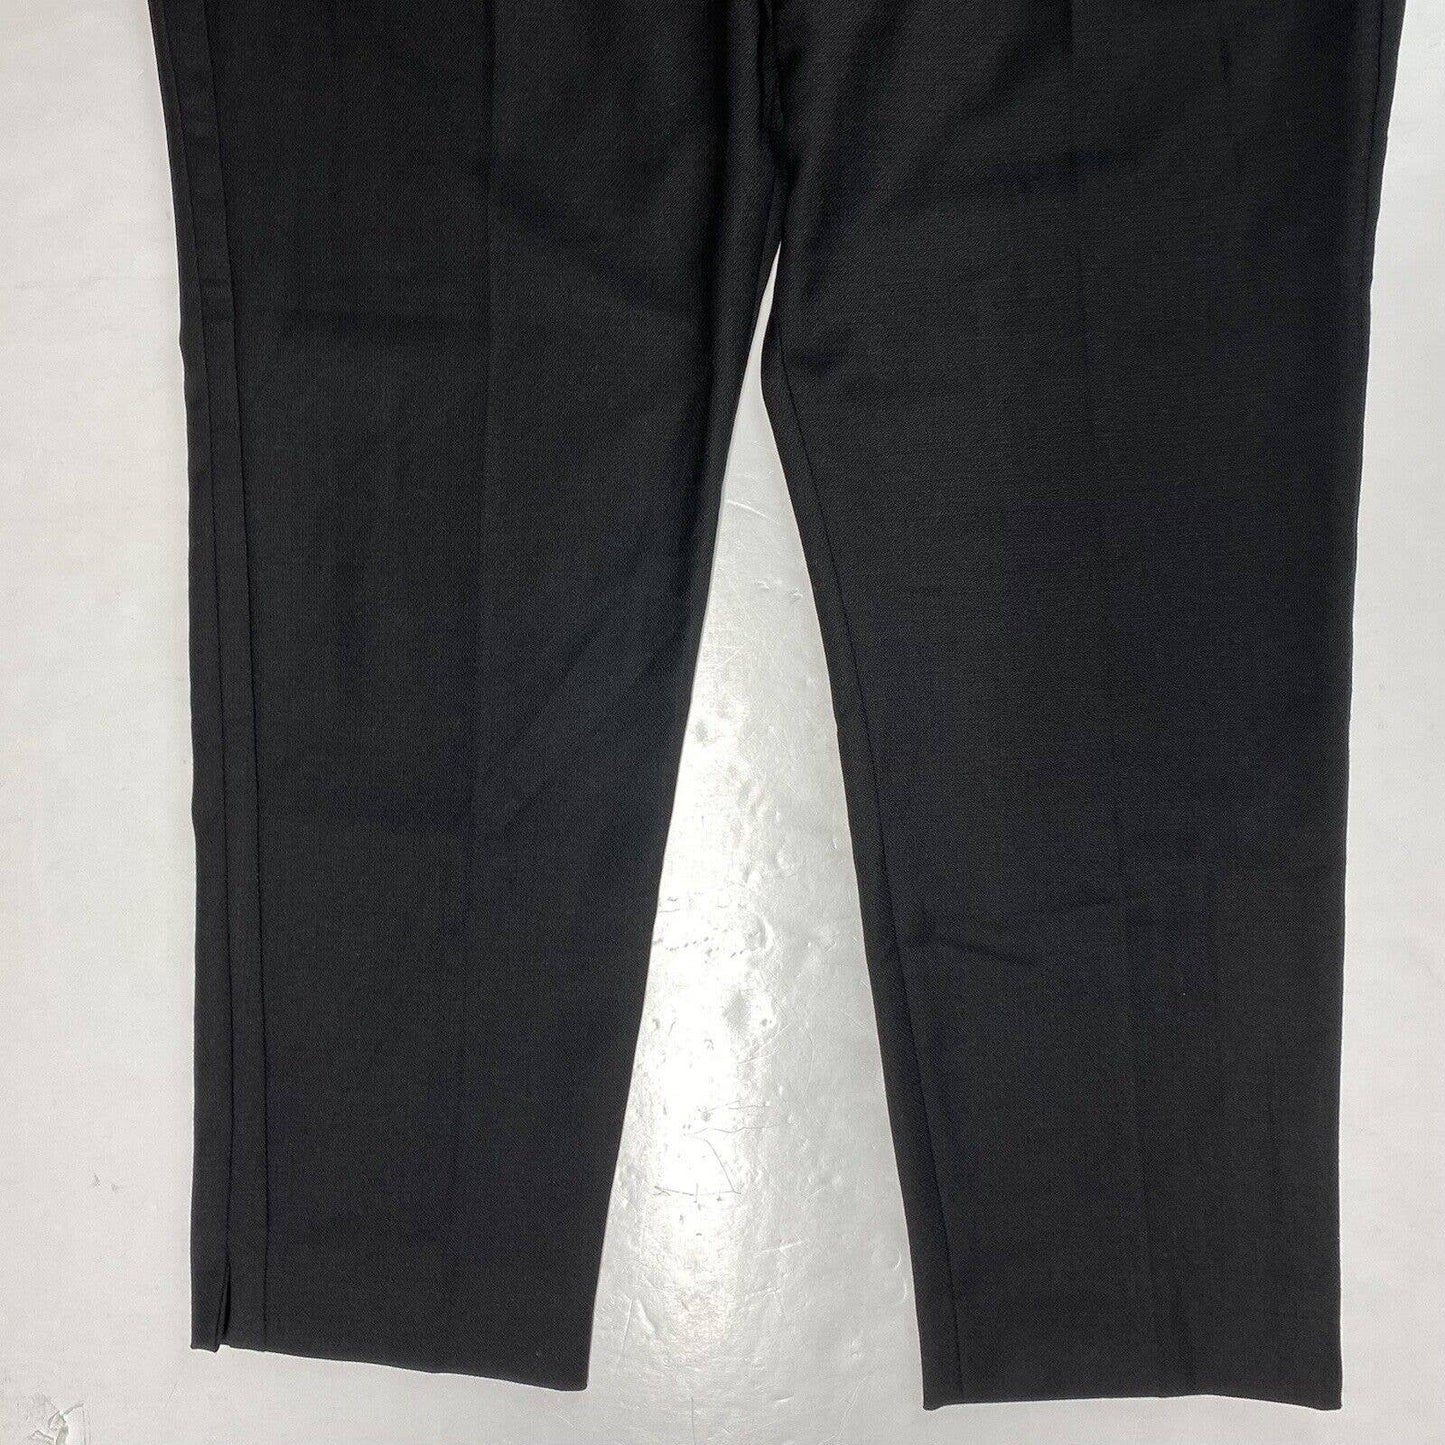 Boden Tapered Ankle Dress Pants Sz 16 High Rise Black Wool Blend Trouser EUC